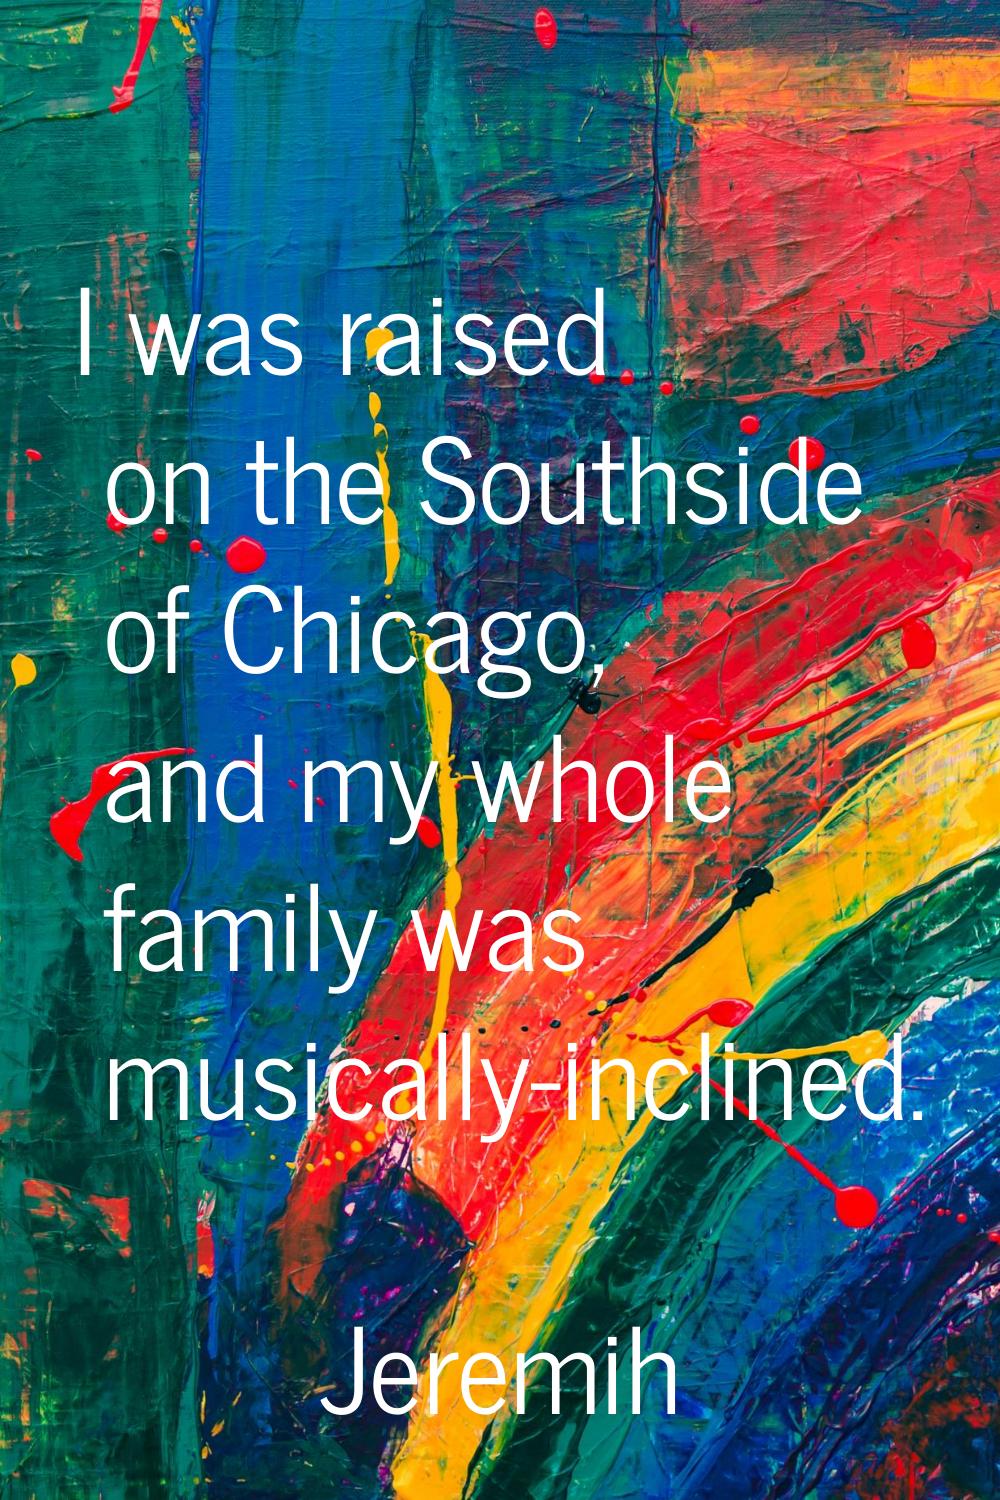 I was raised on the Southside of Chicago, and my whole family was musically-inclined.